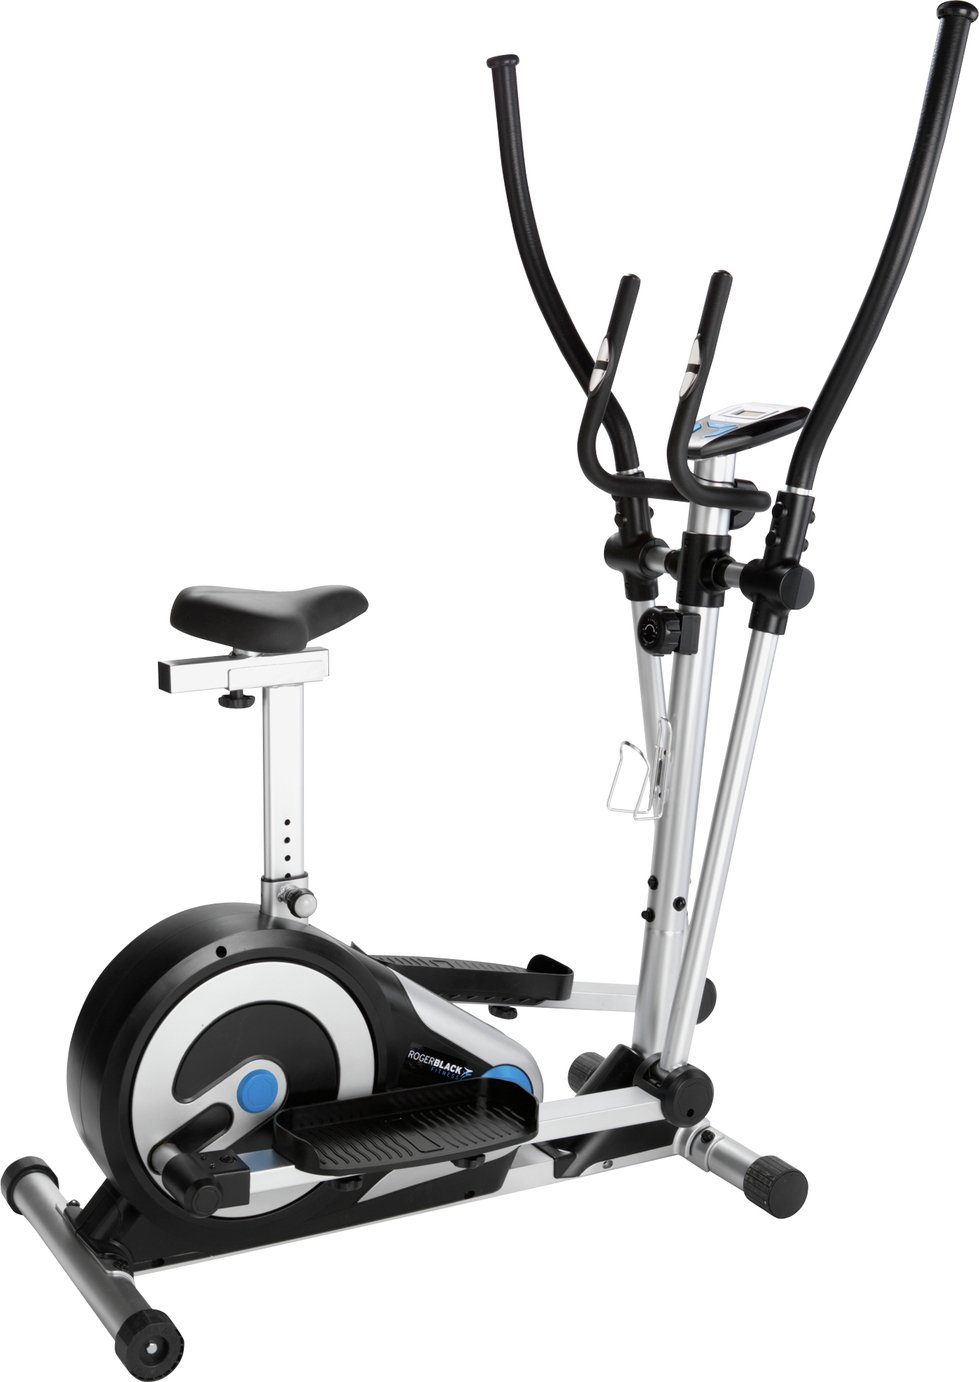 Roger Black 2 in 1 Manual Exercise Bike and Cross Trainer